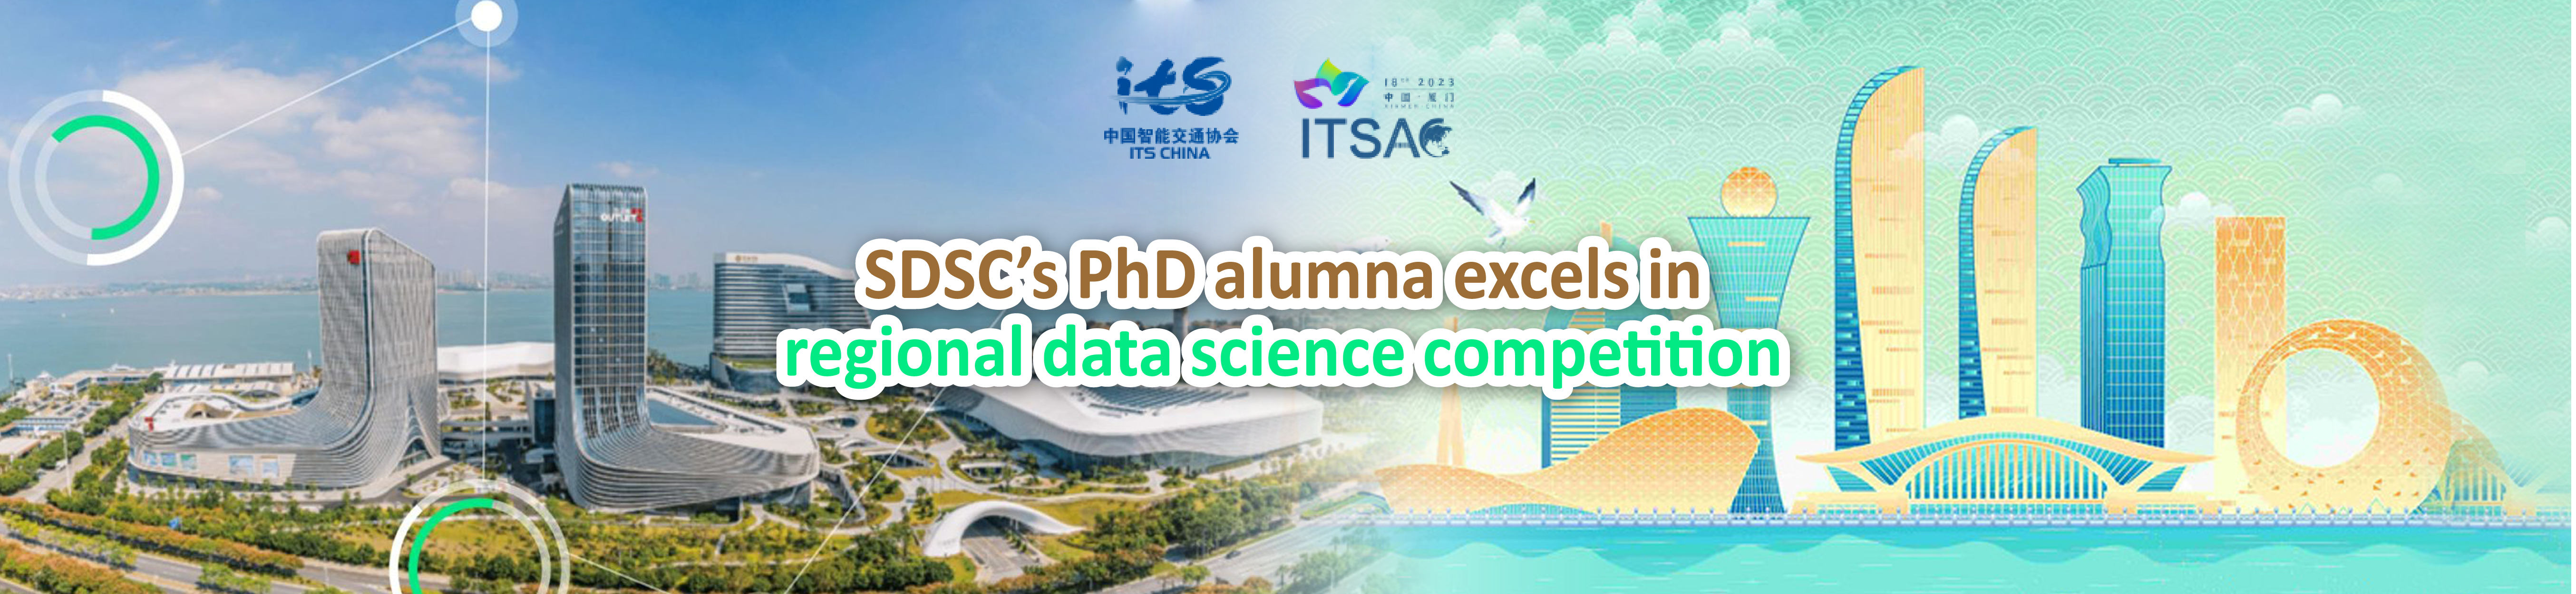 SDSC’s PhD alumna excels in regional data science competition